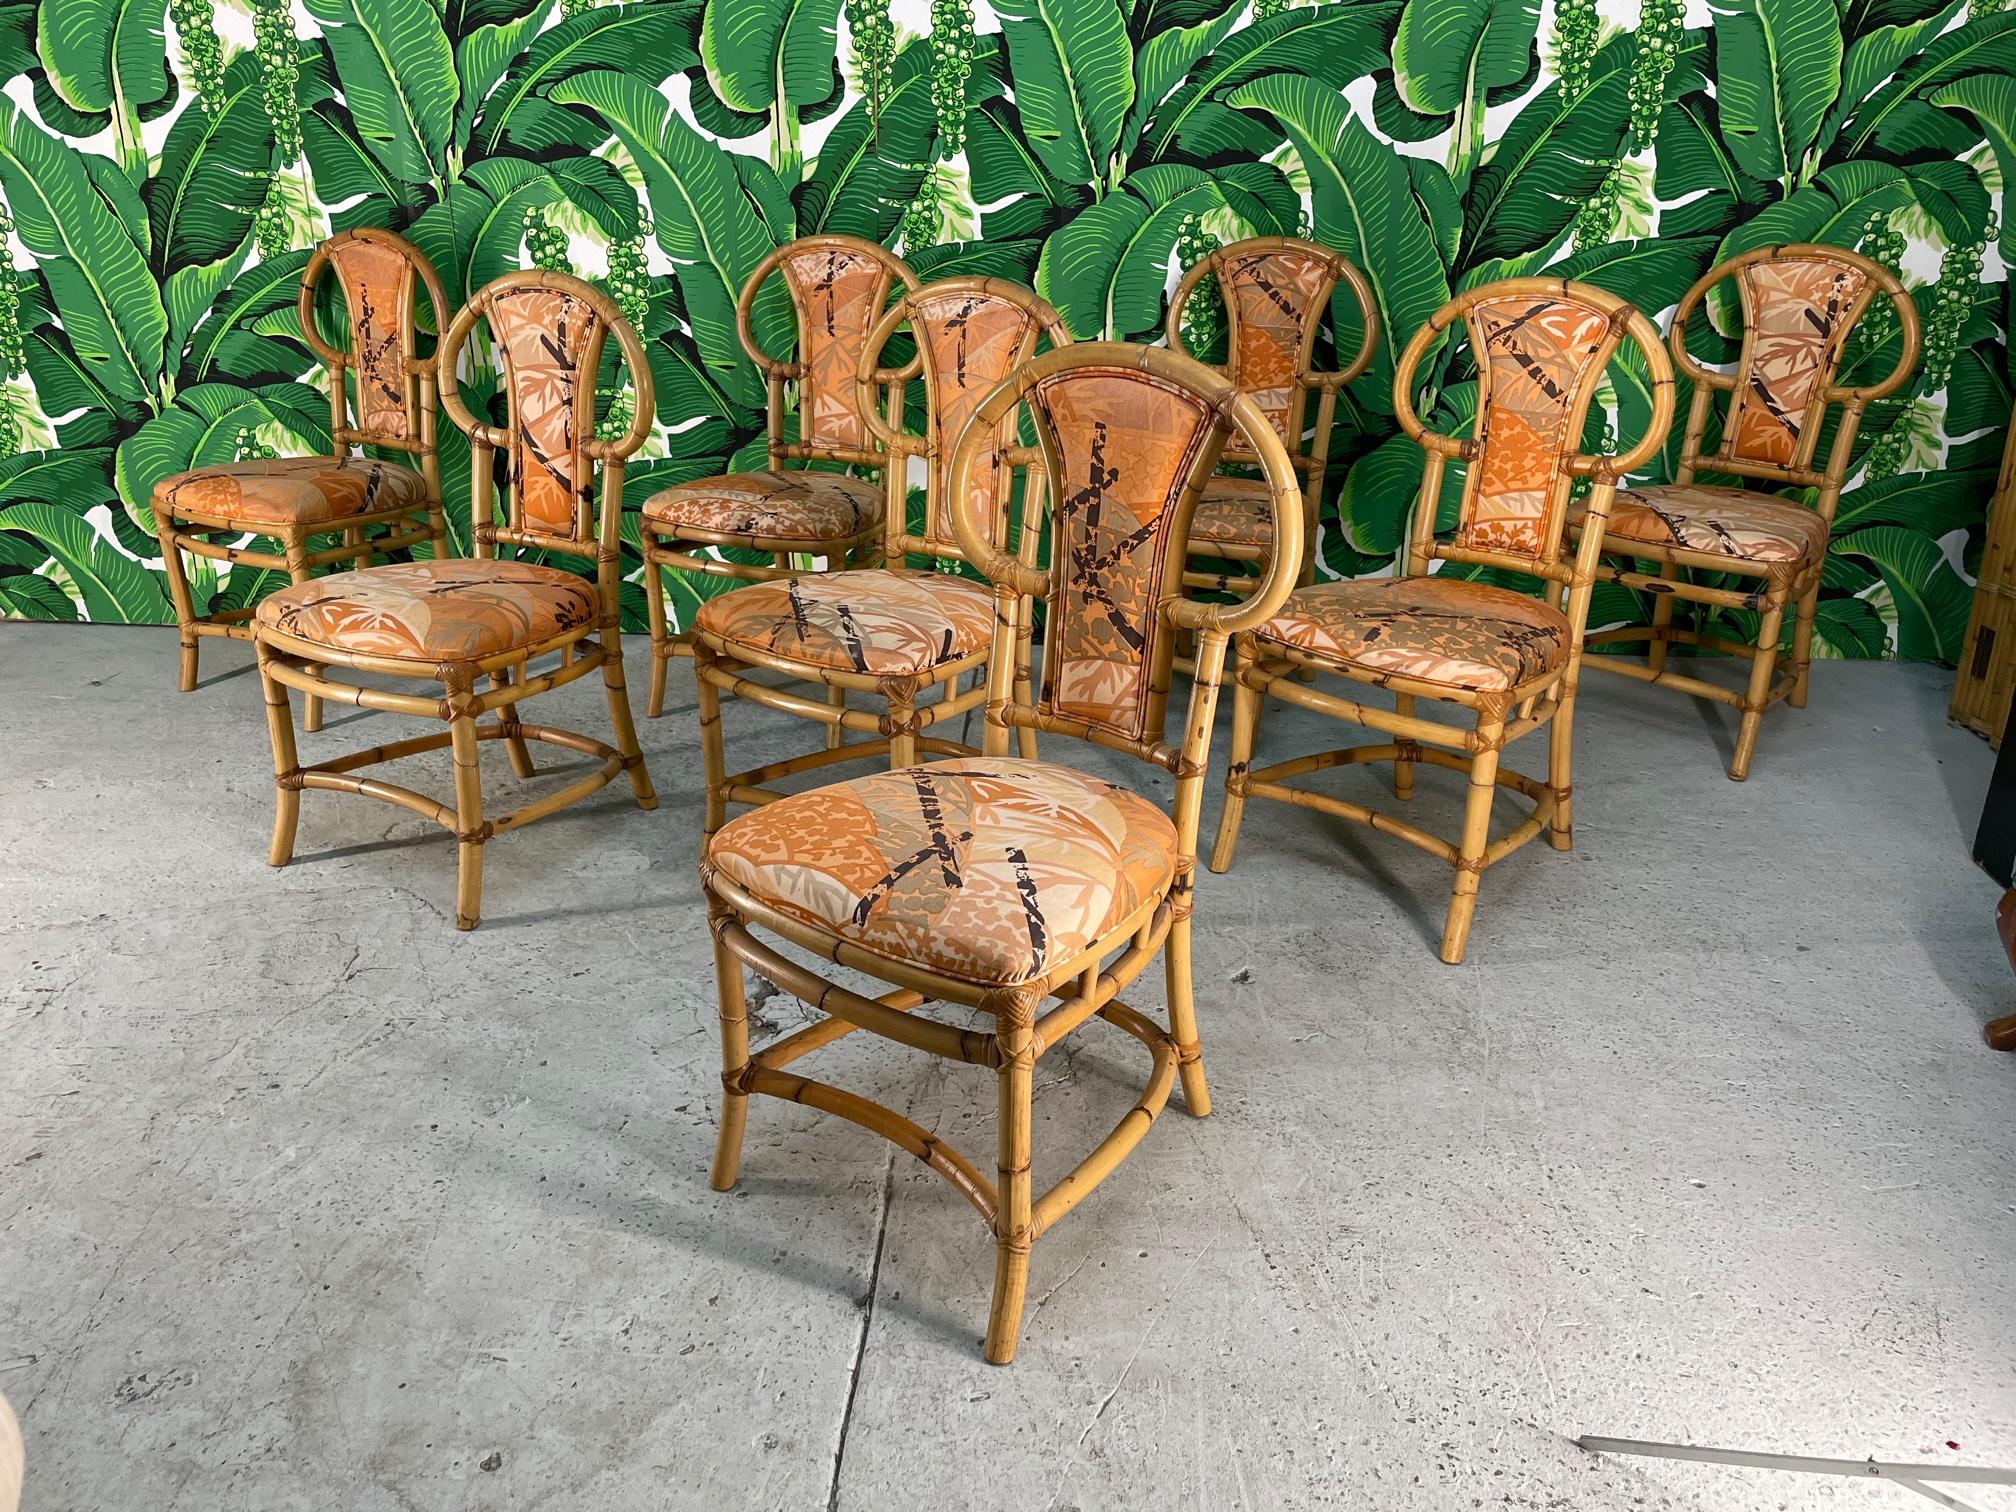 Set of eight rattan dining chairs by Henry Olko for Willow and Reed, circa 1975. Excellent condition with only minor imperfections consistent with age.